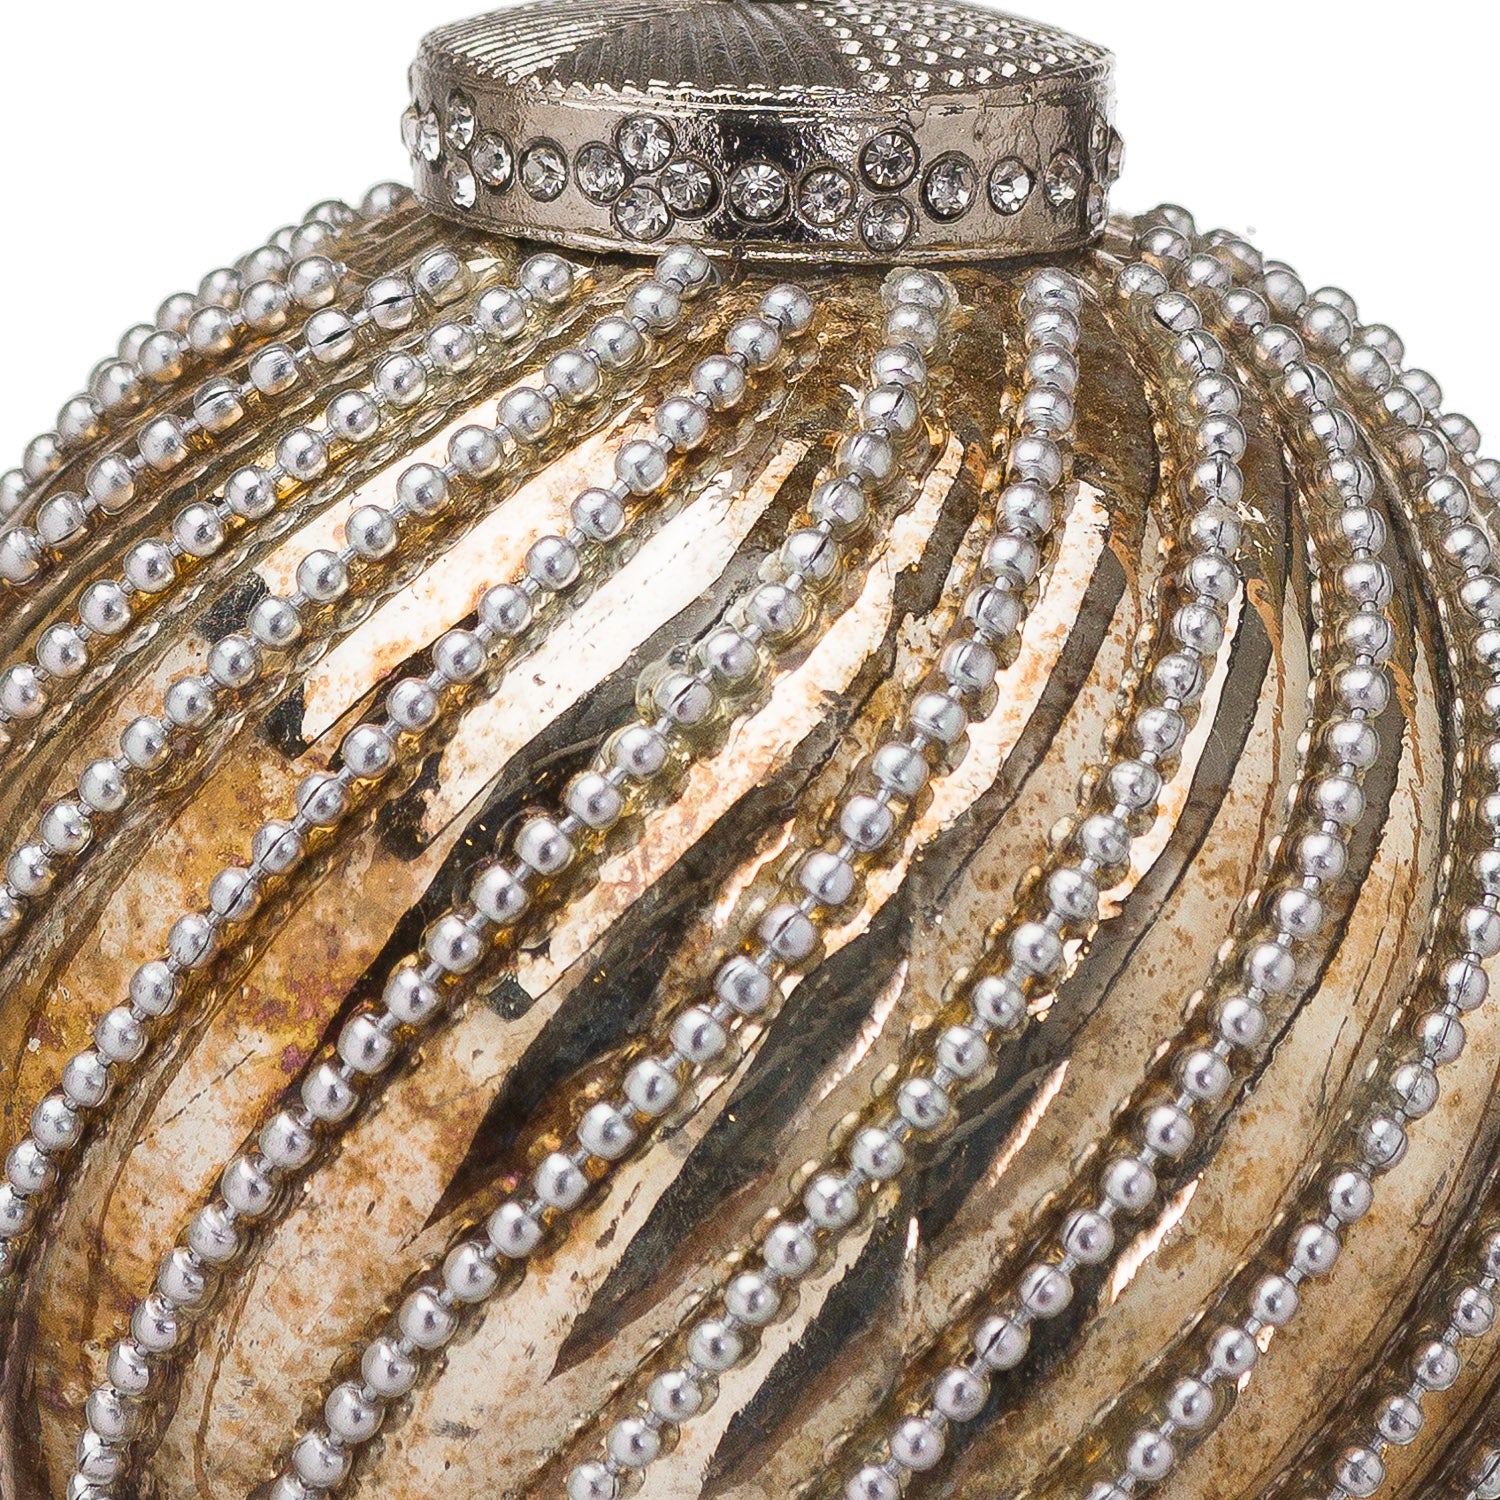 The Noel Collection Burnished Jewel Swirl Large Bauble